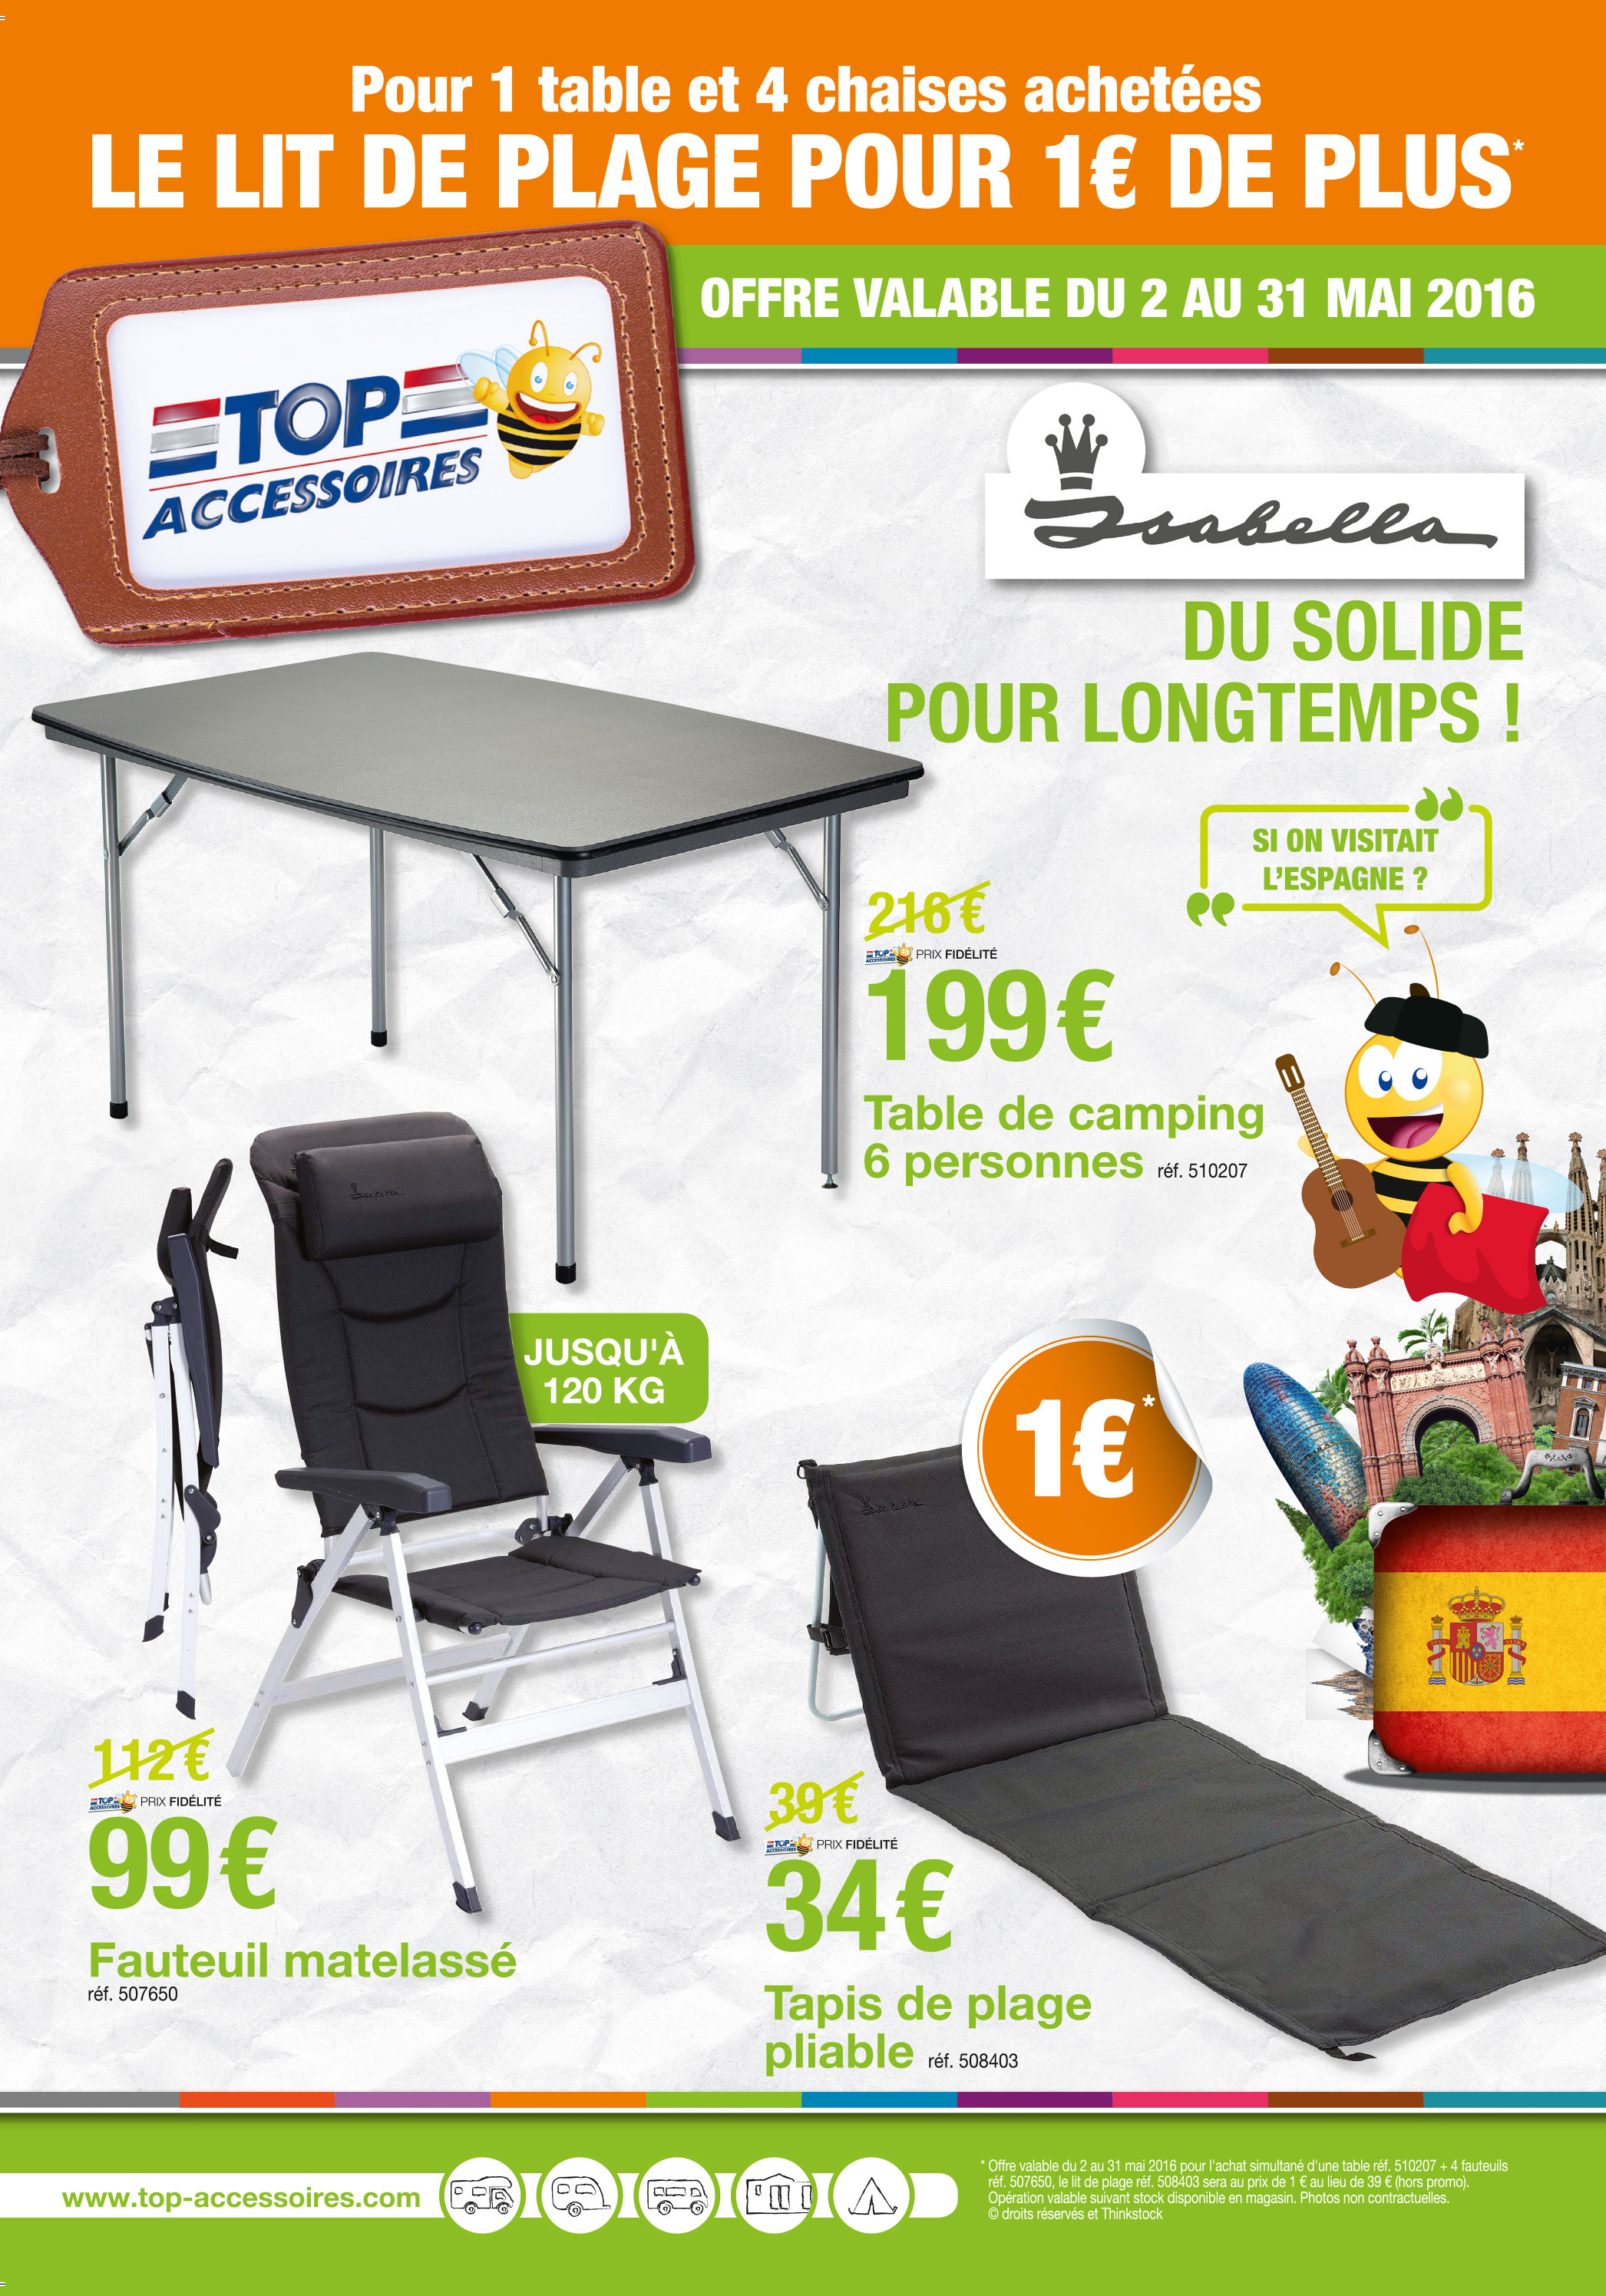 Equipement camping car - Vente accessoires camping car - Achat